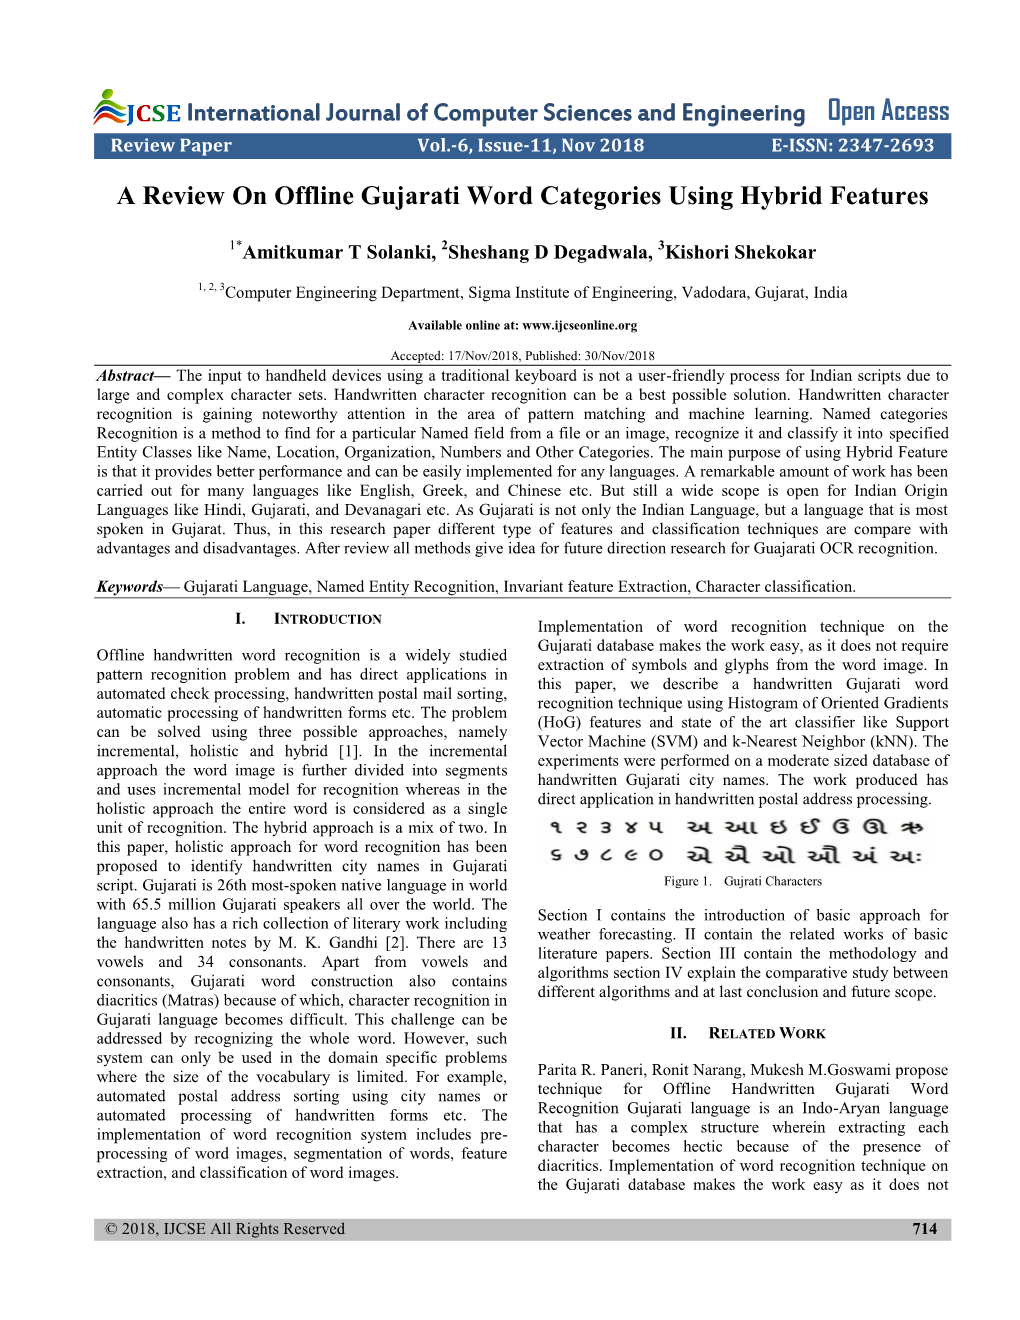 A Review on Offline Gujarati Word Categories Using Hybrid Features